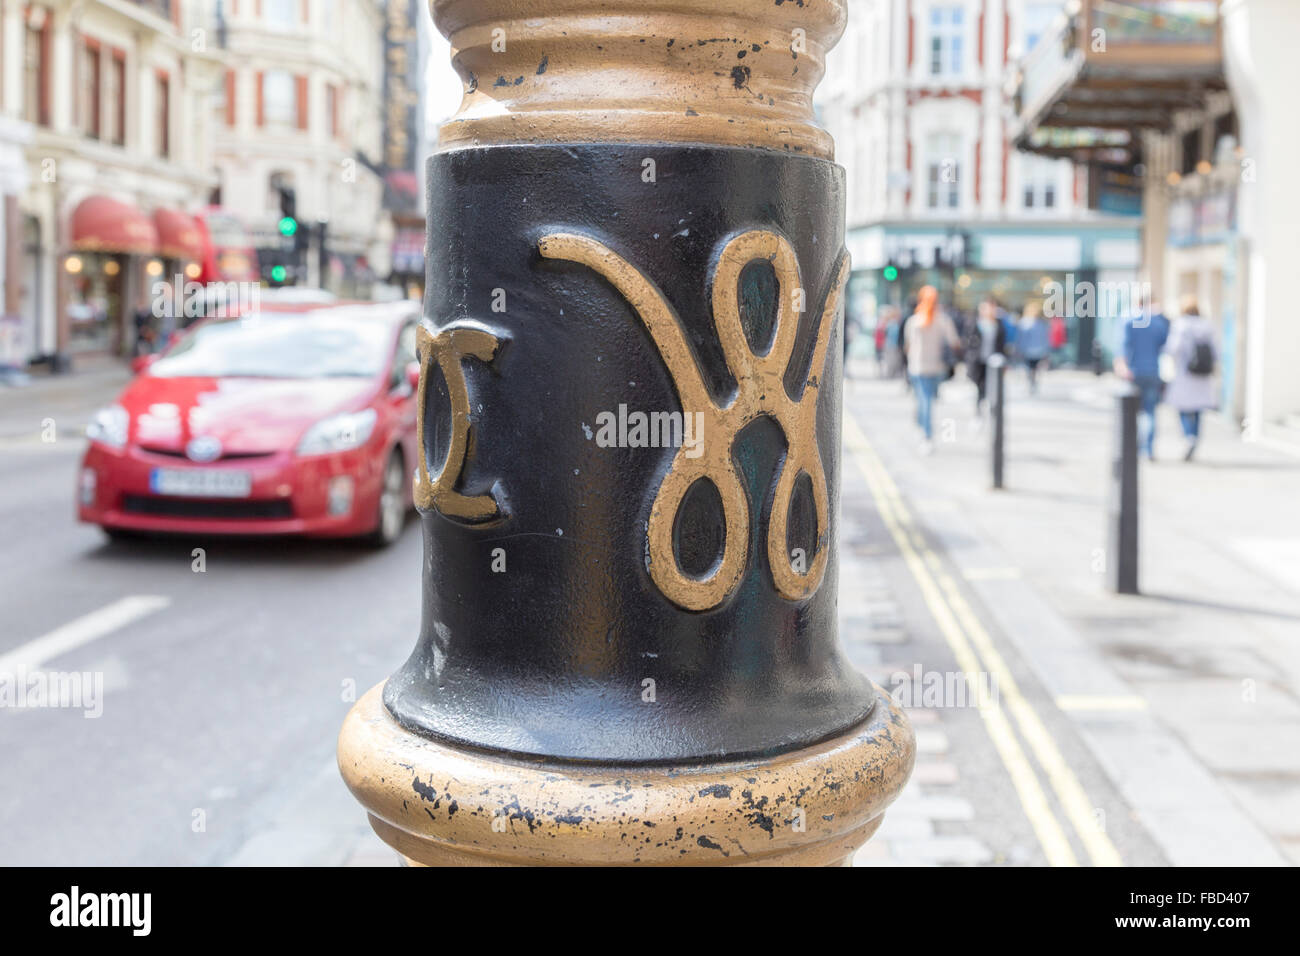 Street lamp with the logo of the fashion designer Coco Chanel, London, United Kingdom Stock Photo